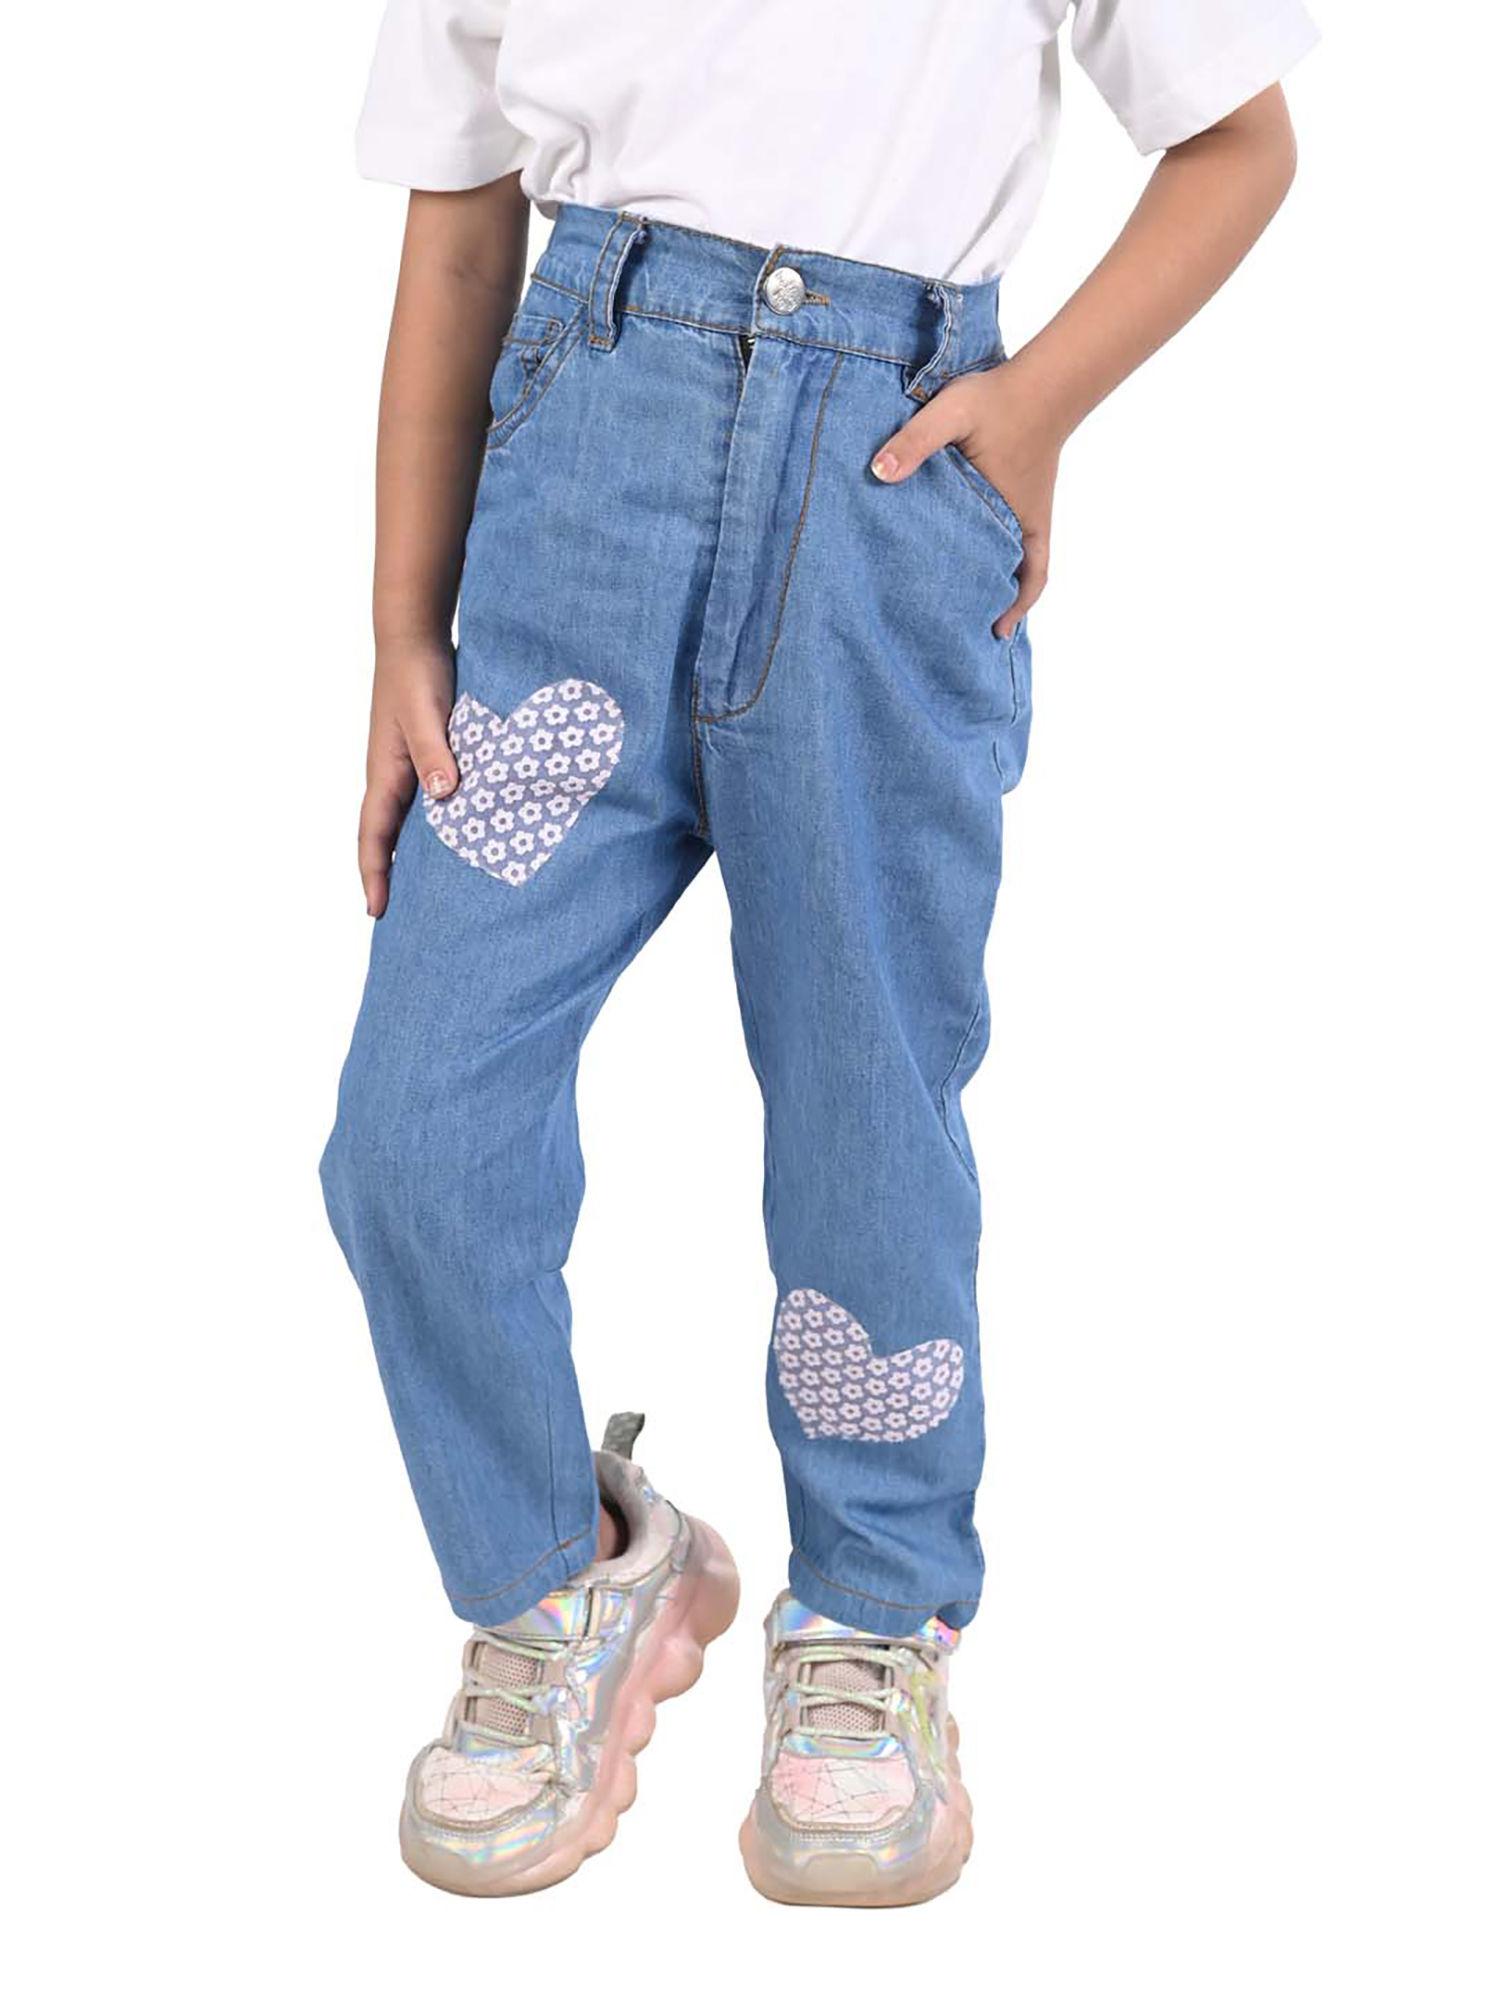 stylish girl blue denim jeans with heart fabric patch